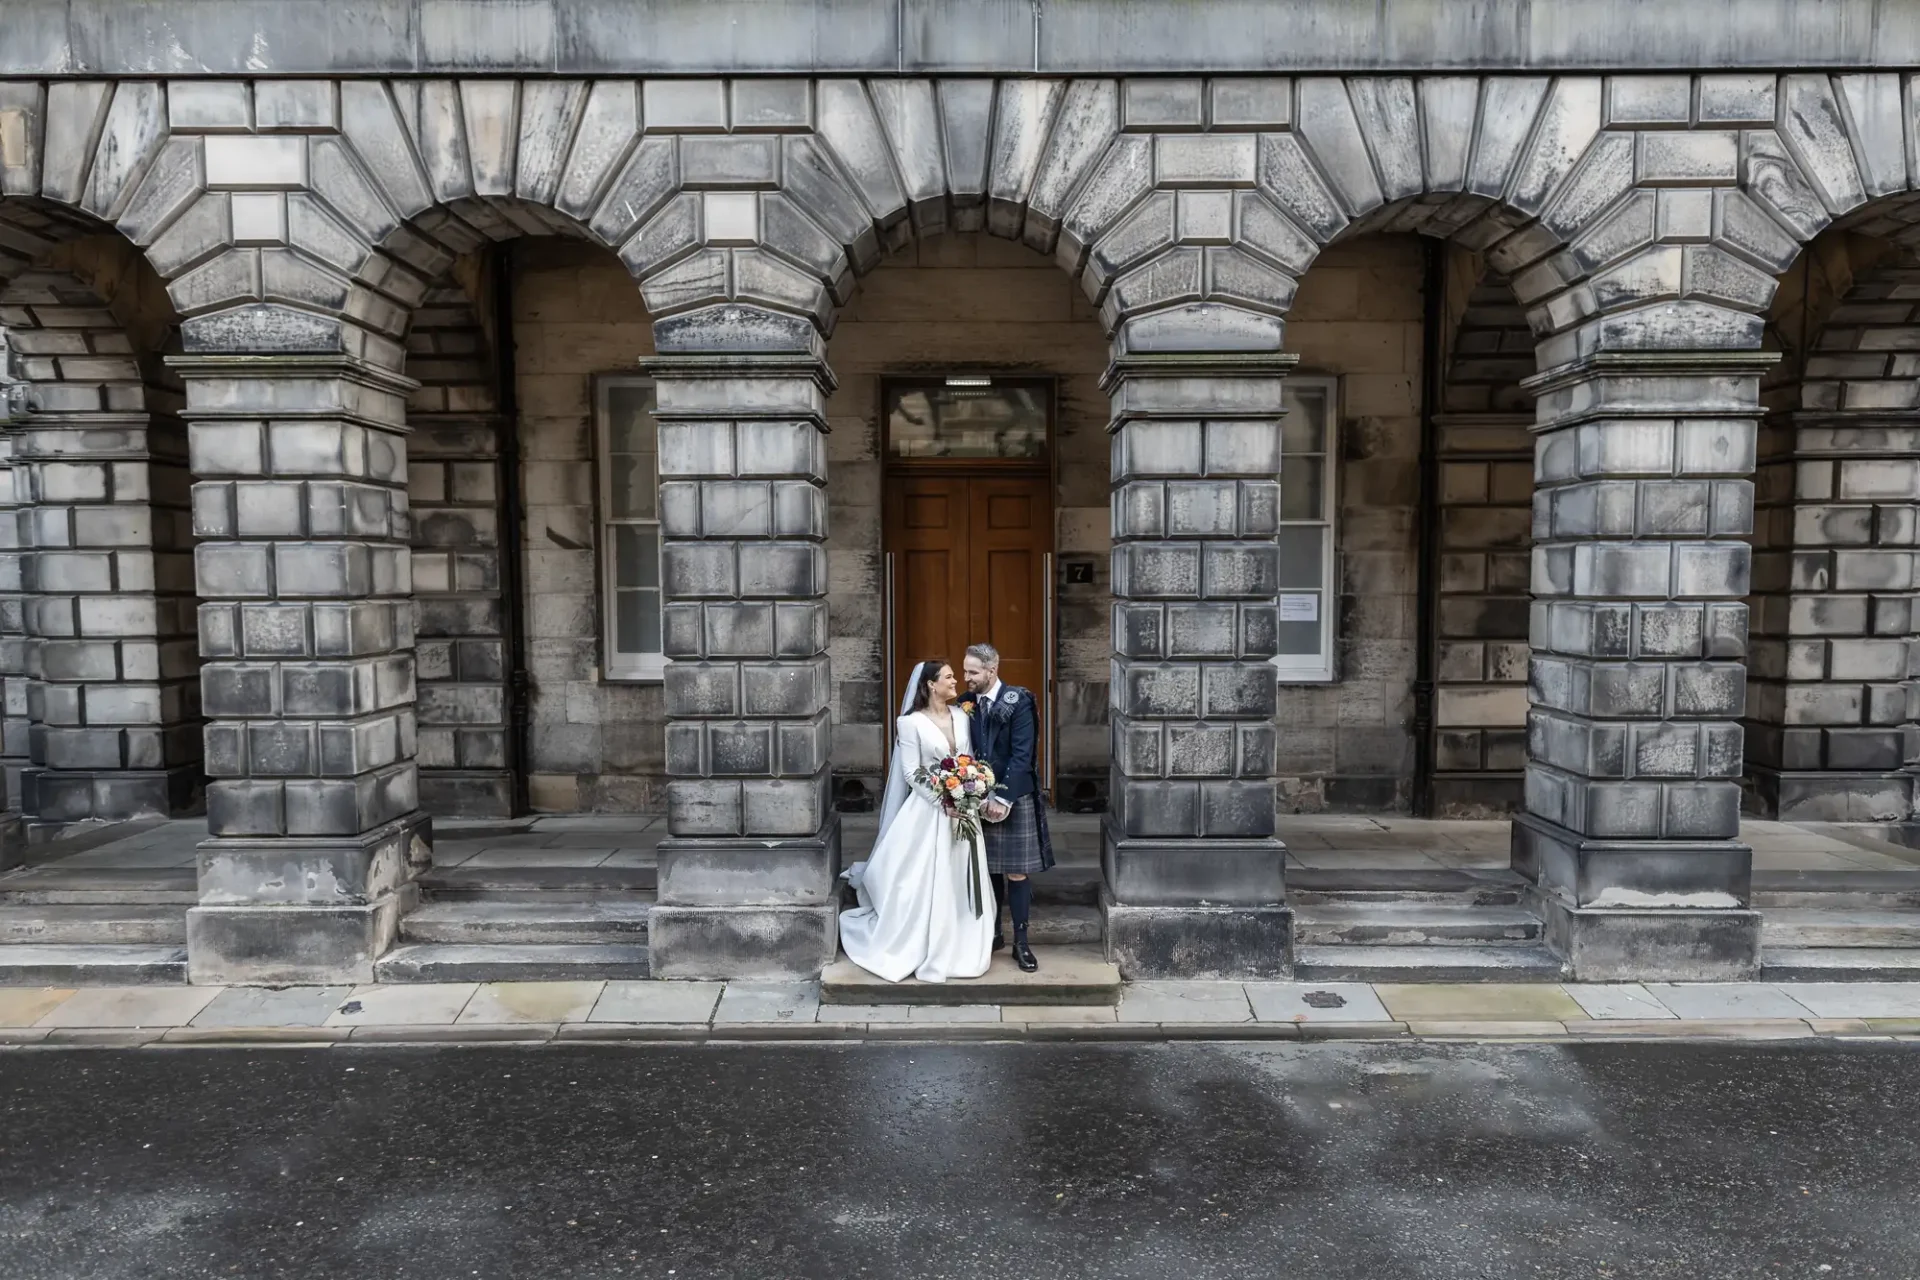 Newlywed couple posing in front of an ornate stone building with large arches. the bride holds a bouquet, and they stand close together, smiling.